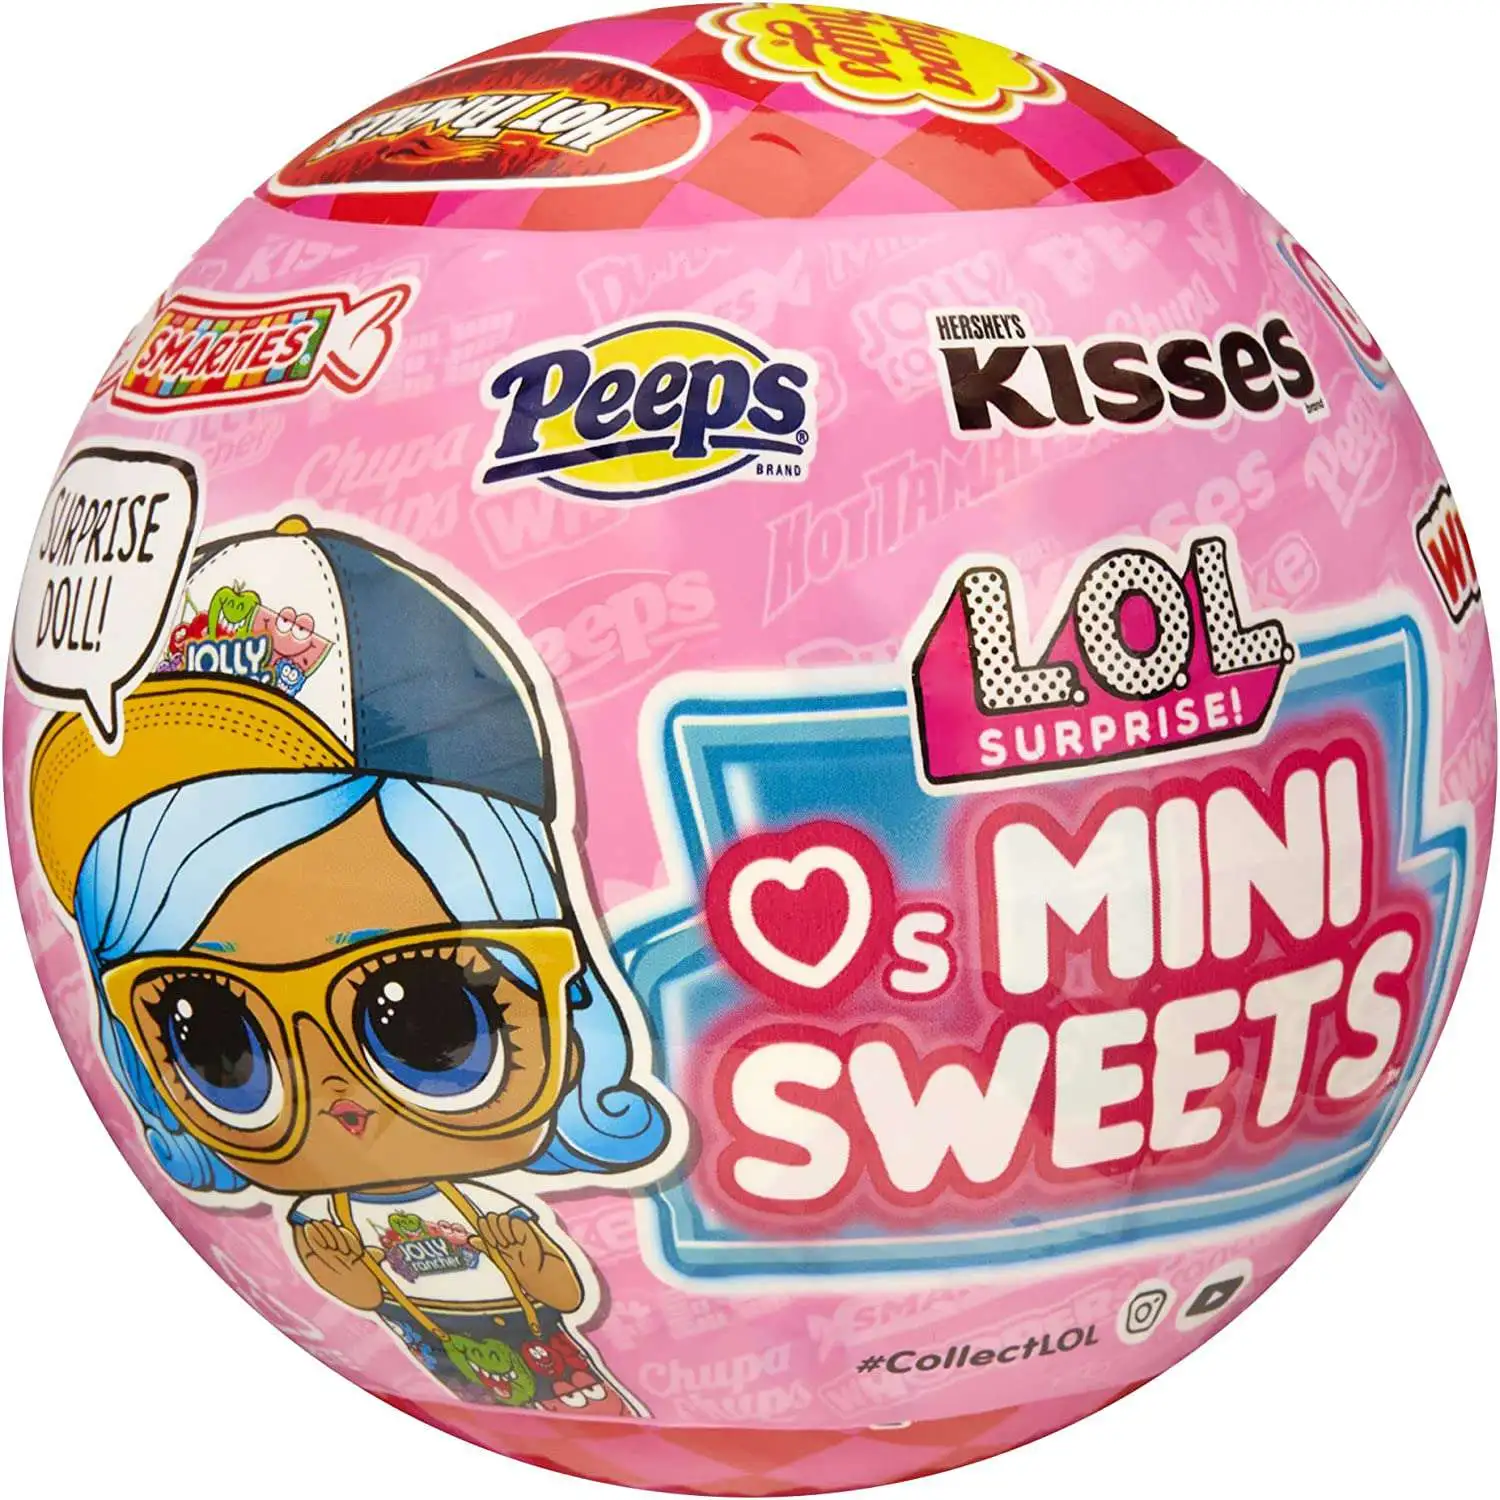  L.O.L. Surprise! Sparkle Series 1 Ball with 7 Sweets